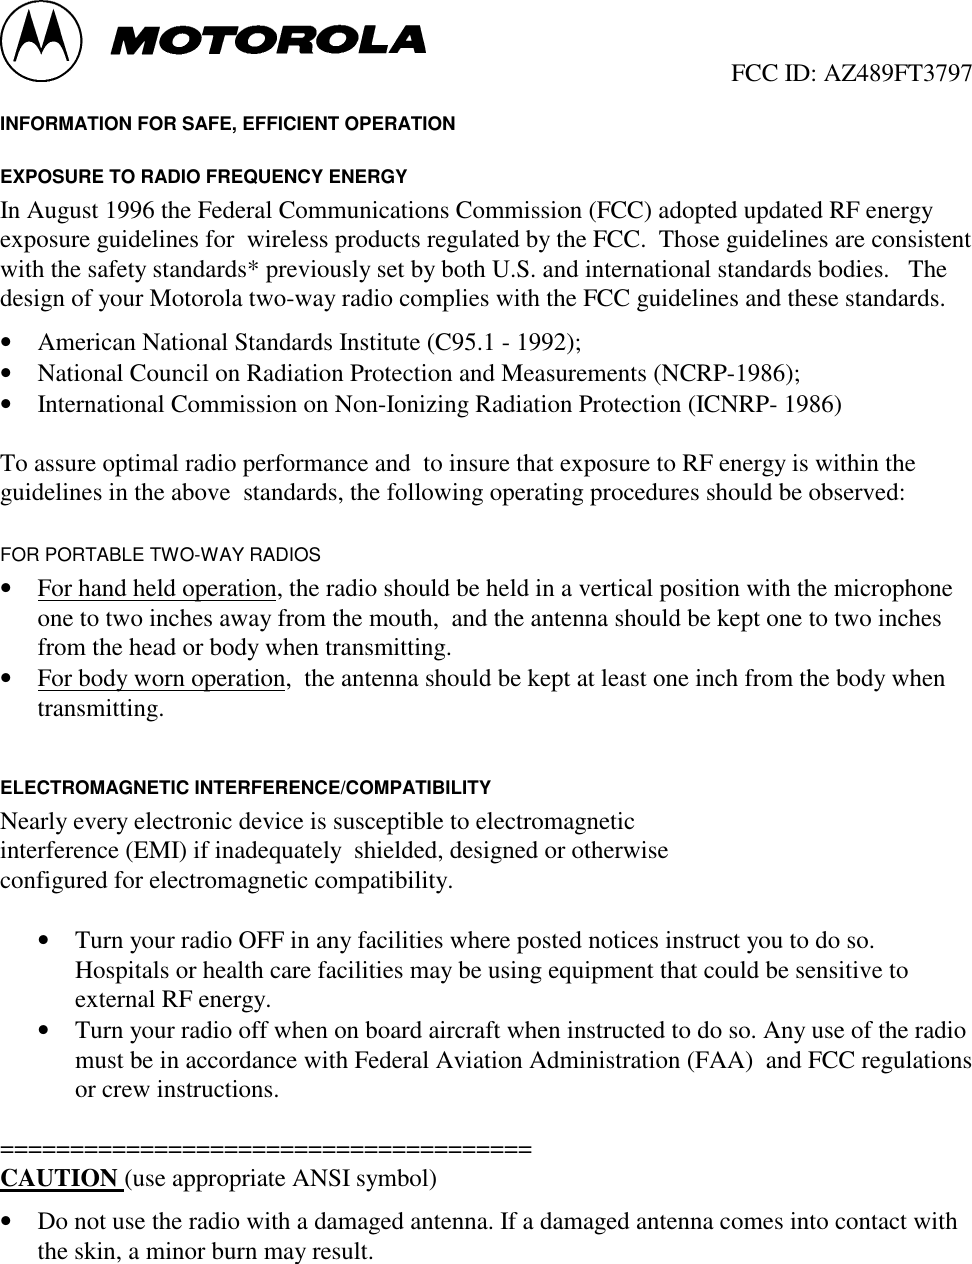                                                  FCC ID: AZ489FT3797INFORMATION FOR SAFE, EFFICIENT OPERATIONEXPOSURE TO RADIO FREQUENCY ENERGYIn August 1996 the Federal Communications Commission (FCC) adopted updated RF energyexposure guidelines for  wireless products regulated by the FCC.  Those guidelines are consistentwith the safety standards* previously set by both U.S. and international standards bodies.   Thedesign of your Motorola two-way radio complies with the FCC guidelines and these standards.• American National Standards Institute (C95.1 - 1992);• National Council on Radiation Protection and Measurements (NCRP-1986);• International Commission on Non-Ionizing Radiation Protection (ICNRP- 1986)To assure optimal radio performance and  to insure that exposure to RF energy is within theguidelines in the above  standards, the following operating procedures should be observed:FOR PORTABLE TWO-WAY RADIOS• For hand held operation, the radio should be held in a vertical position with the microphoneone to two inches away from the mouth,  and the antenna should be kept one to two inchesfrom the head or body when transmitting.• For body worn operation,  the antenna should be kept at least one inch from the body whentransmitting.ELECTROMAGNETIC INTERFERENCE/COMPATIBILITYNearly every electronic device is susceptible to electromagneticinterference (EMI) if inadequately  shielded, designed or otherwiseconfigured for electromagnetic compatibility.• Turn your radio OFF in any facilities where posted notices instruct you to do so.Hospitals or health care facilities may be using equipment that could be sensitive toexternal RF energy.• Turn your radio off when on board aircraft when instructed to do so. Any use of the radiomust be in accordance with Federal Aviation Administration (FAA)  and FCC regulationsor crew instructions.======================================CAUTION (use appropriate ANSI symbol)• Do not use the radio with a damaged antenna. If a damaged antenna comes into contact withthe skin, a minor burn may result.